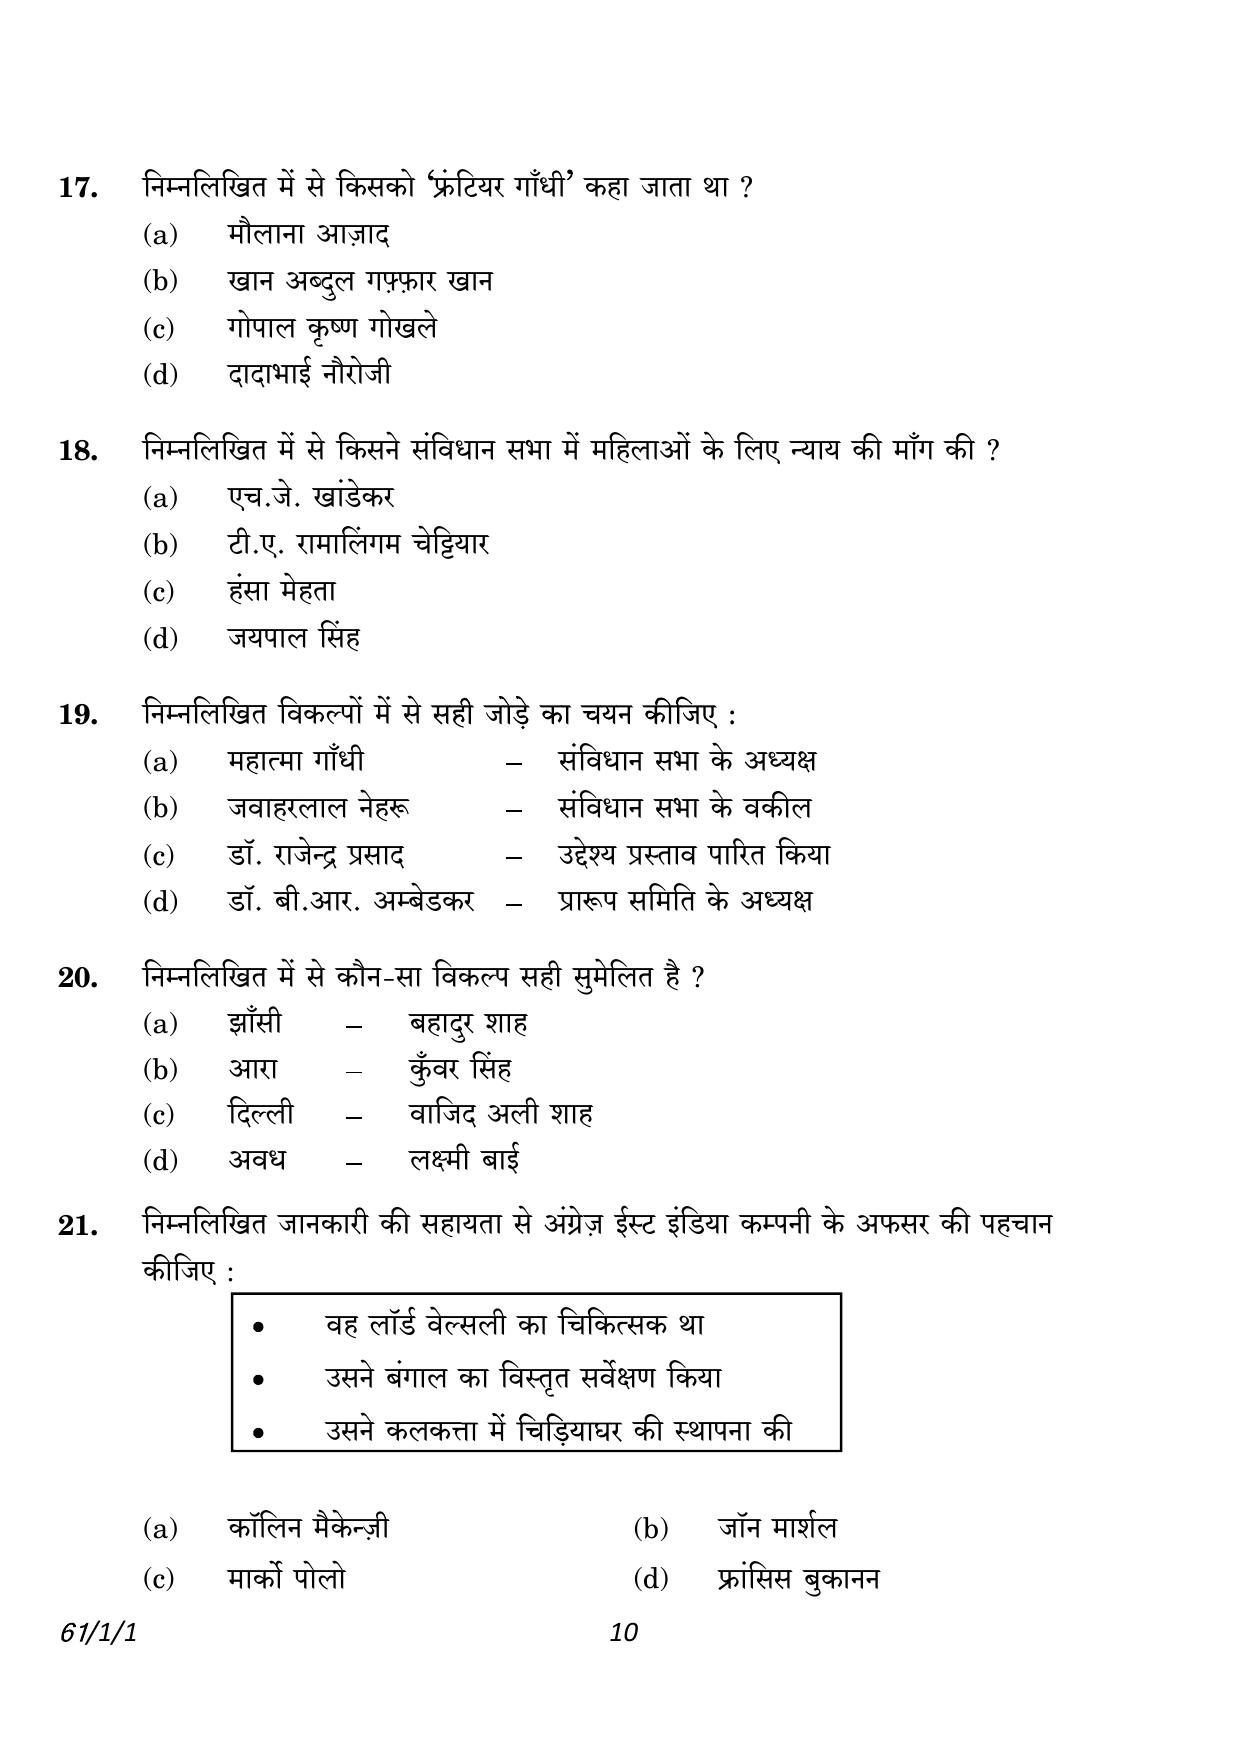 CBSE Class 12 61-1-1 History 2023 Question Paper - Page 10